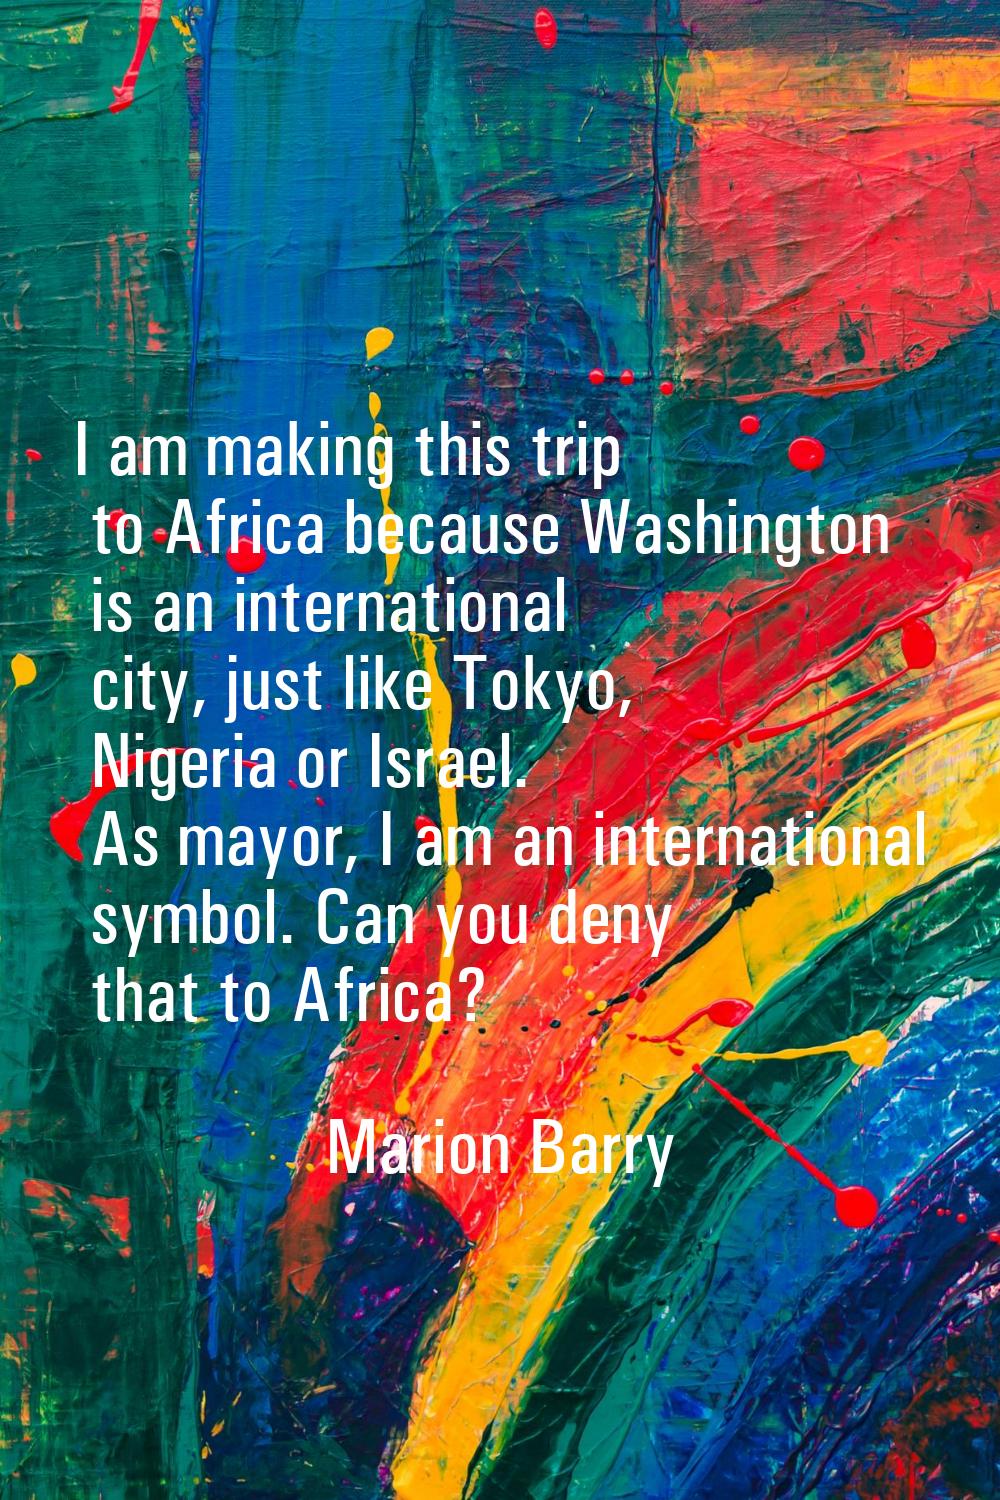 I am making this trip to Africa because Washington is an international city, just like Tokyo, Niger